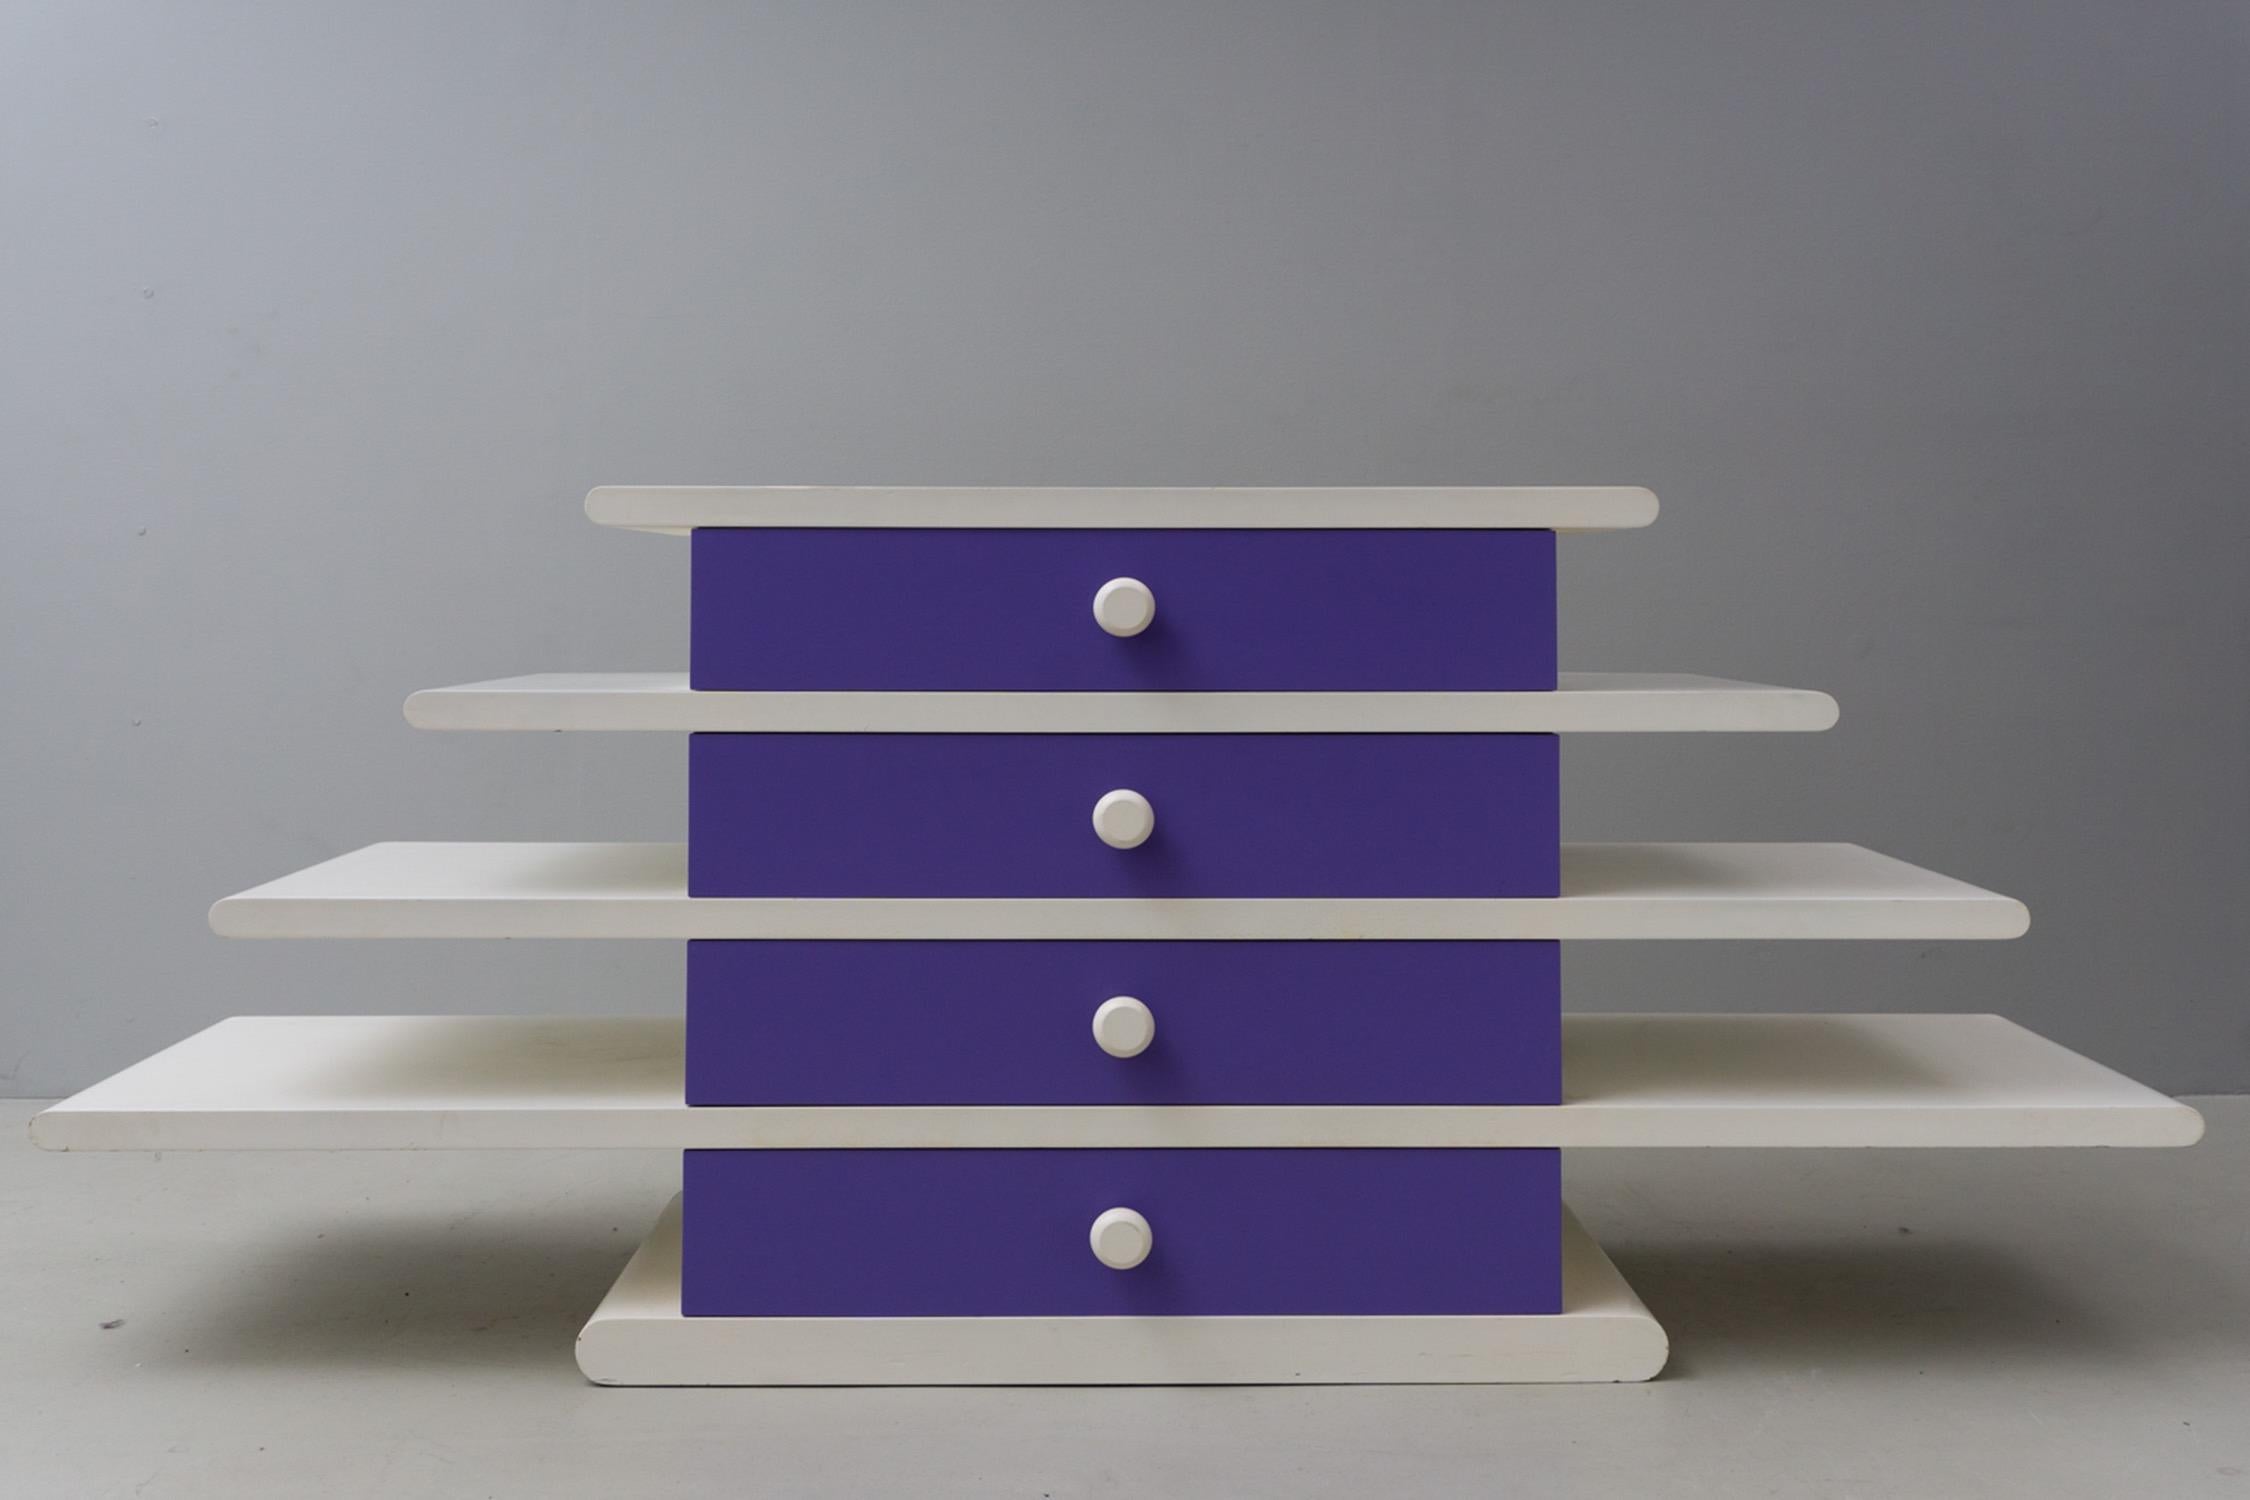 This rare and seminal piece by Hans von Klier has four drawers and is made of lacquered wood in white and lilac. 
It was manufactured by Planula di Agliana in Italy. 

Hans von Klier (1934 – 2000) was an Austrian designer, who worked closely with